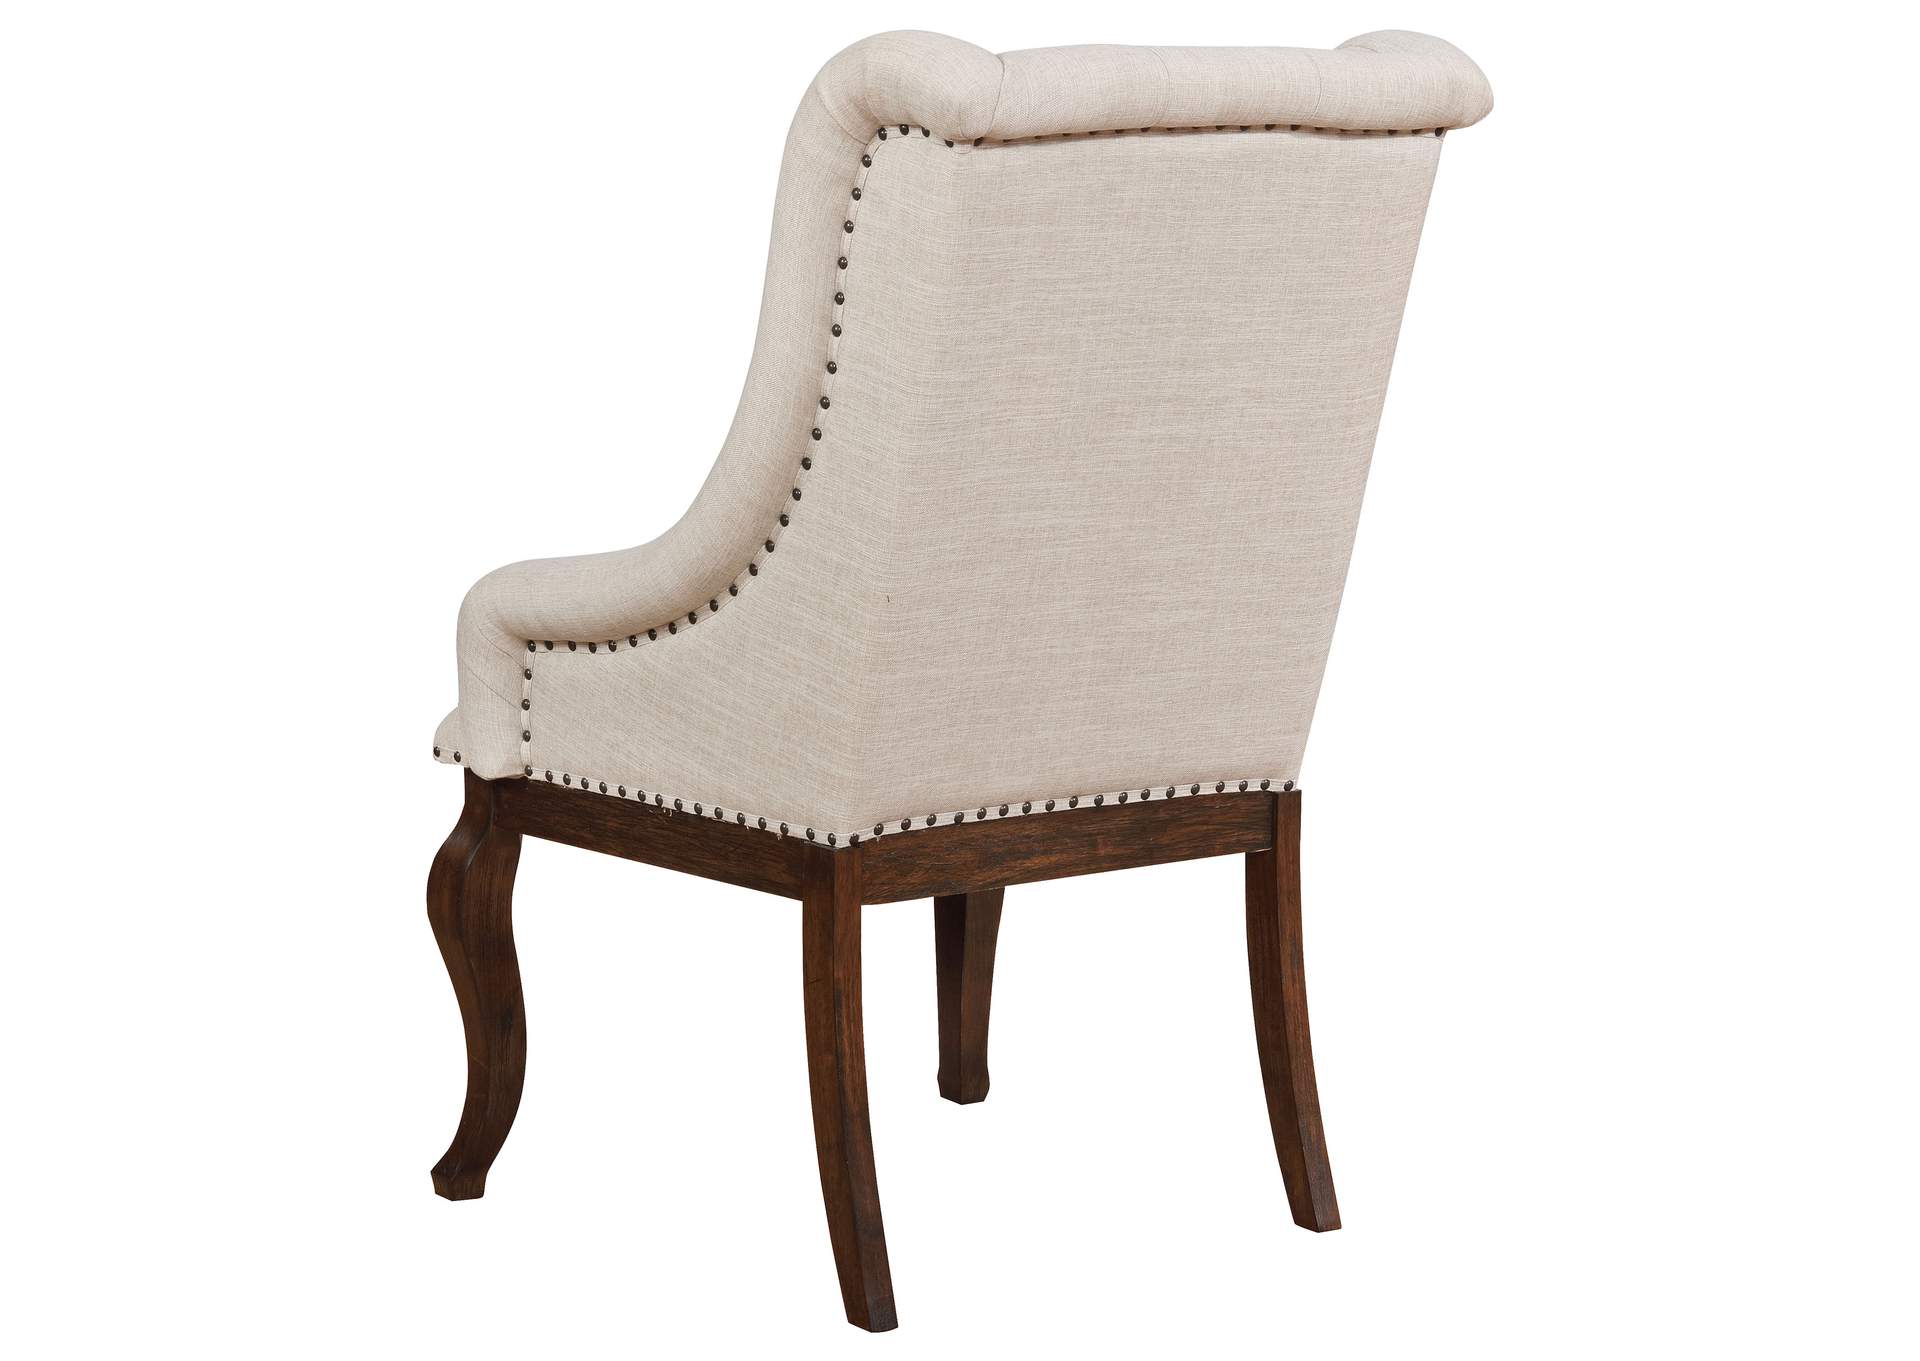 Brockway Cove Tufted Arm Chairs Cream and Antique Java (Set of 2),Coaster Furniture